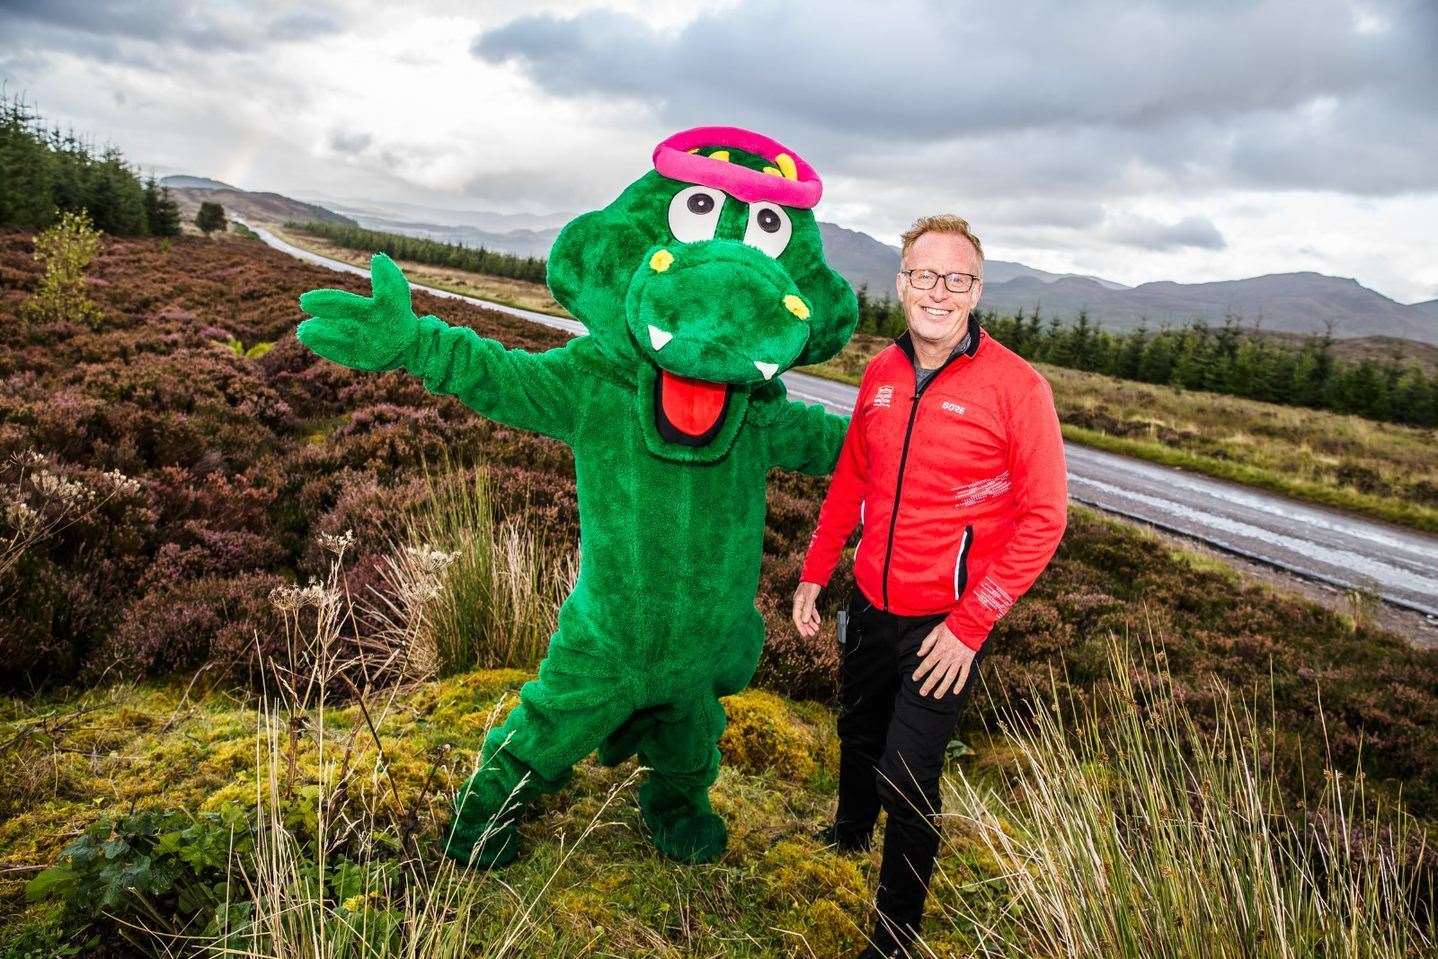 Nessie, pictured with Bryan Burnett, ran the Loch Ness Marathon's route to officially open early-bird entry to the run.